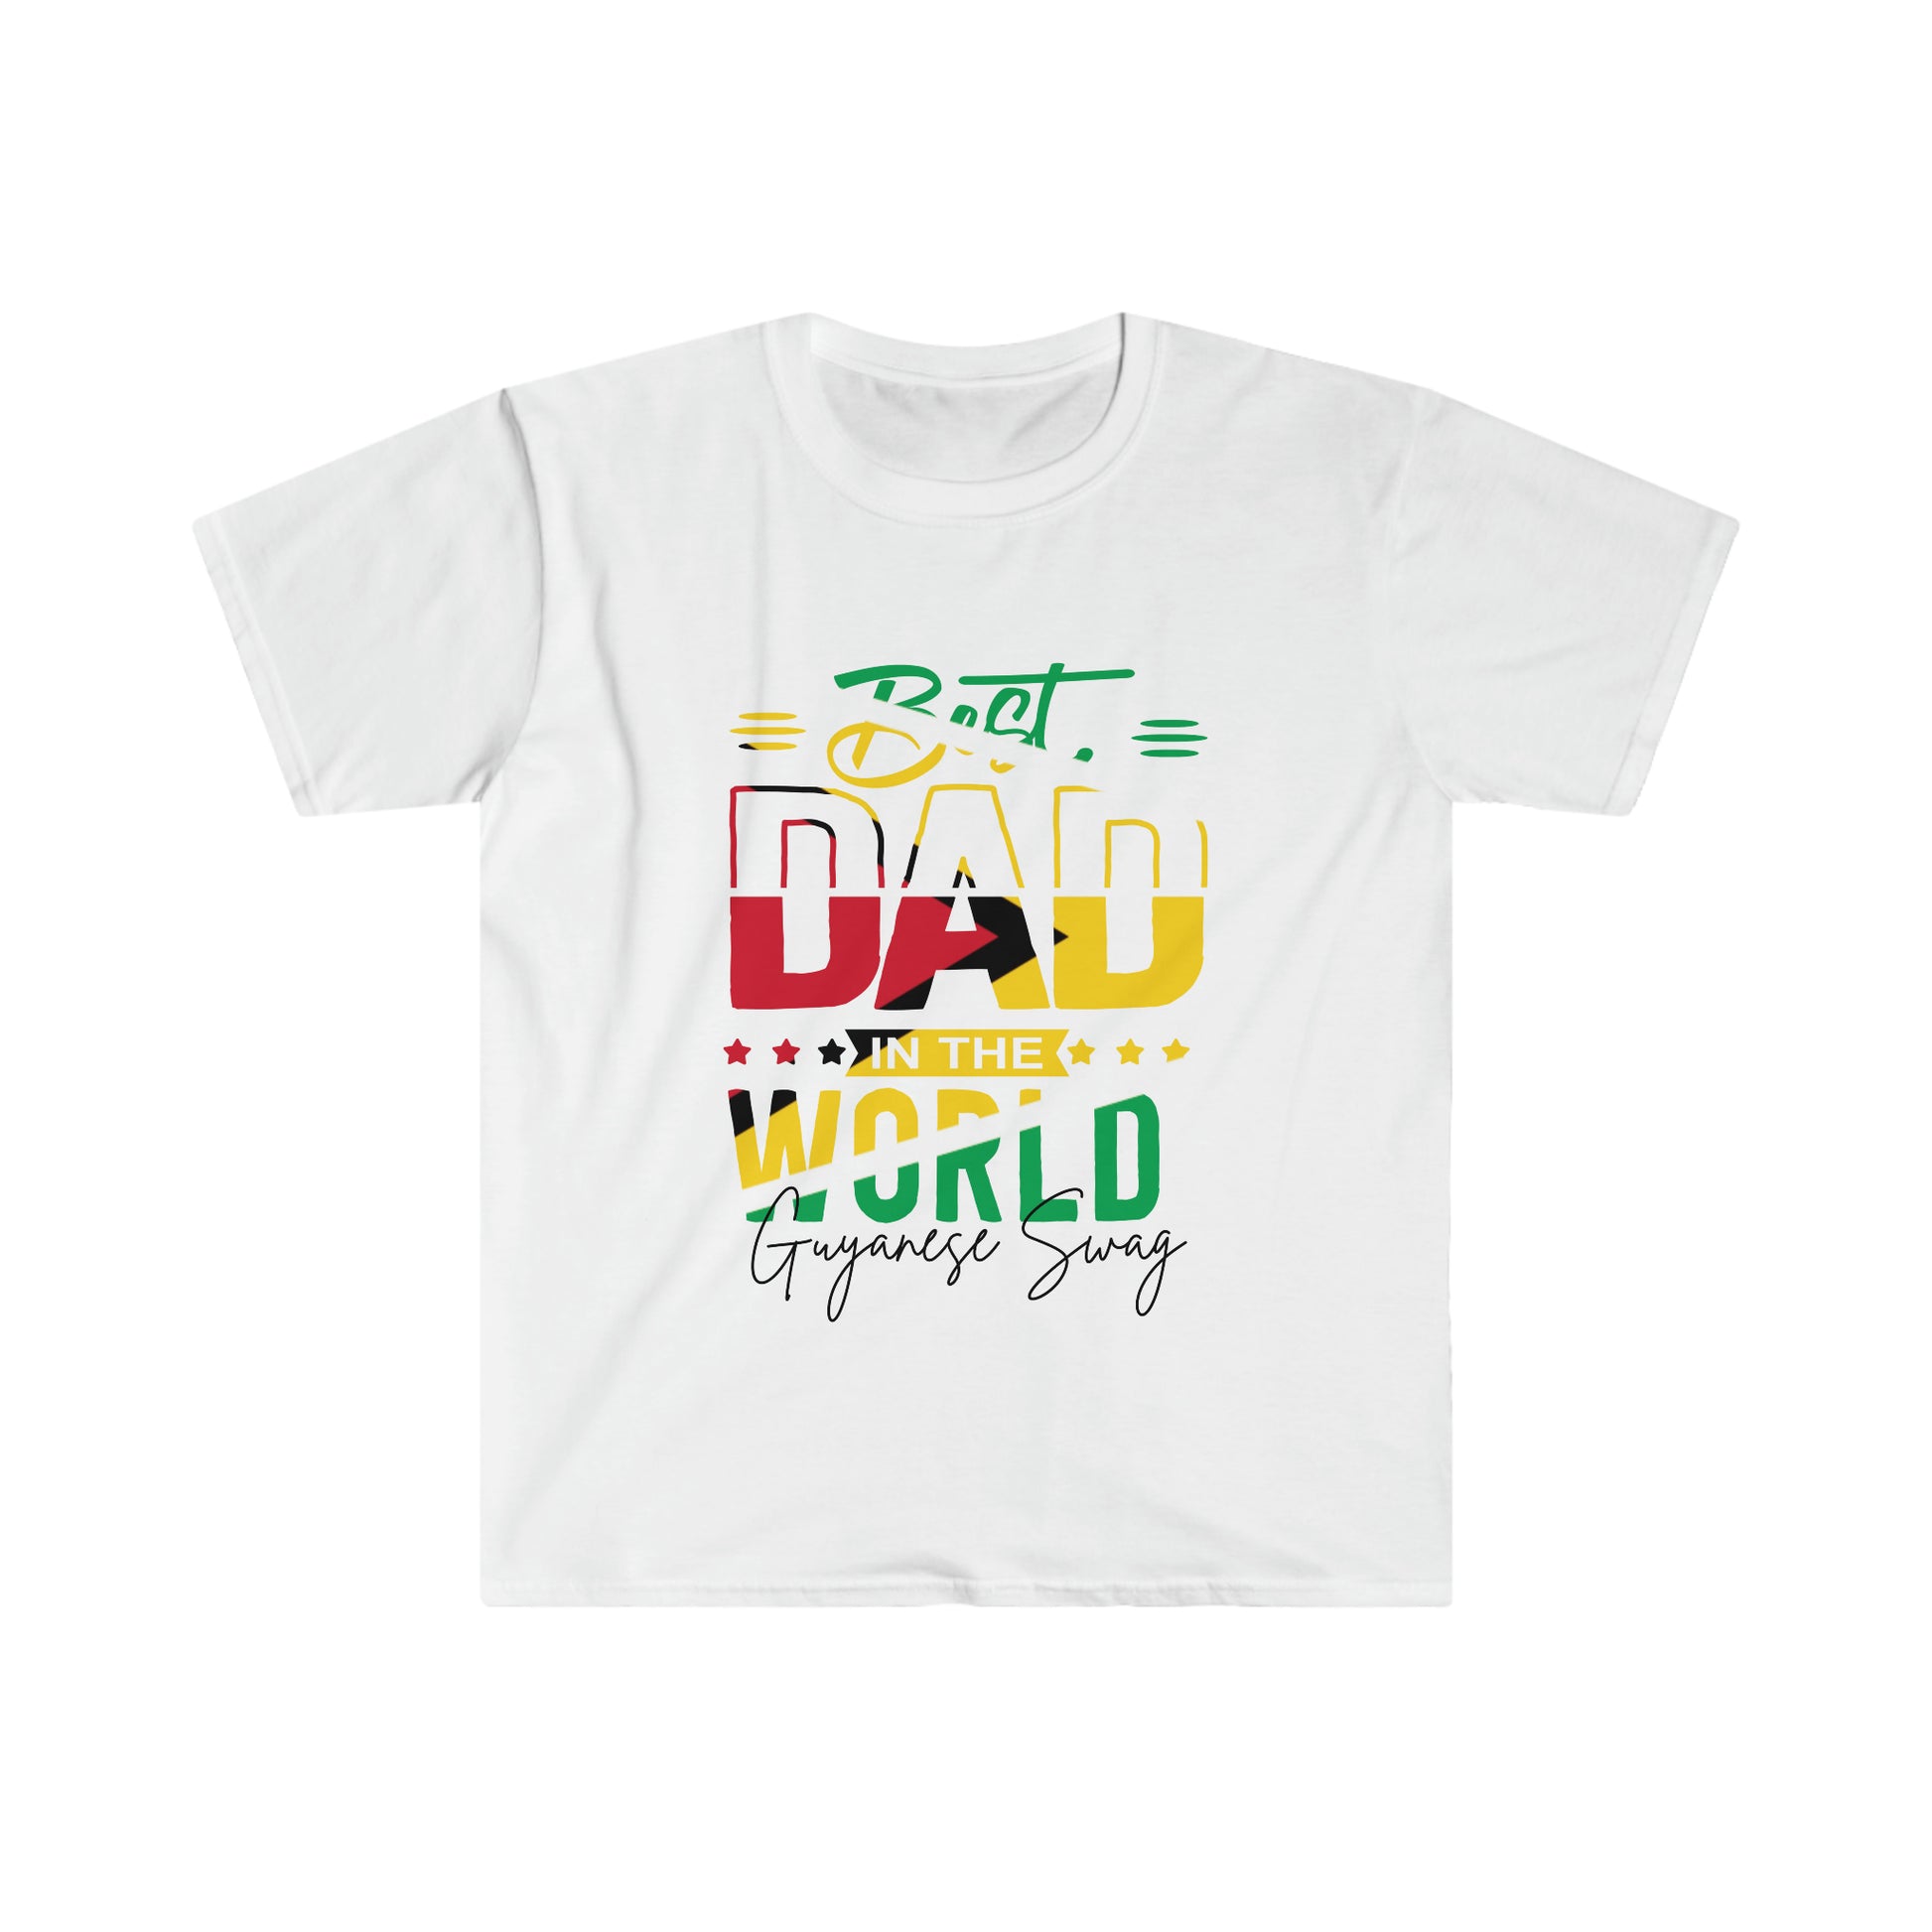 Father's Day Best Dad in The World Men Soft Style Shirt Sleeve T-Shirt by Guyanese Swag.